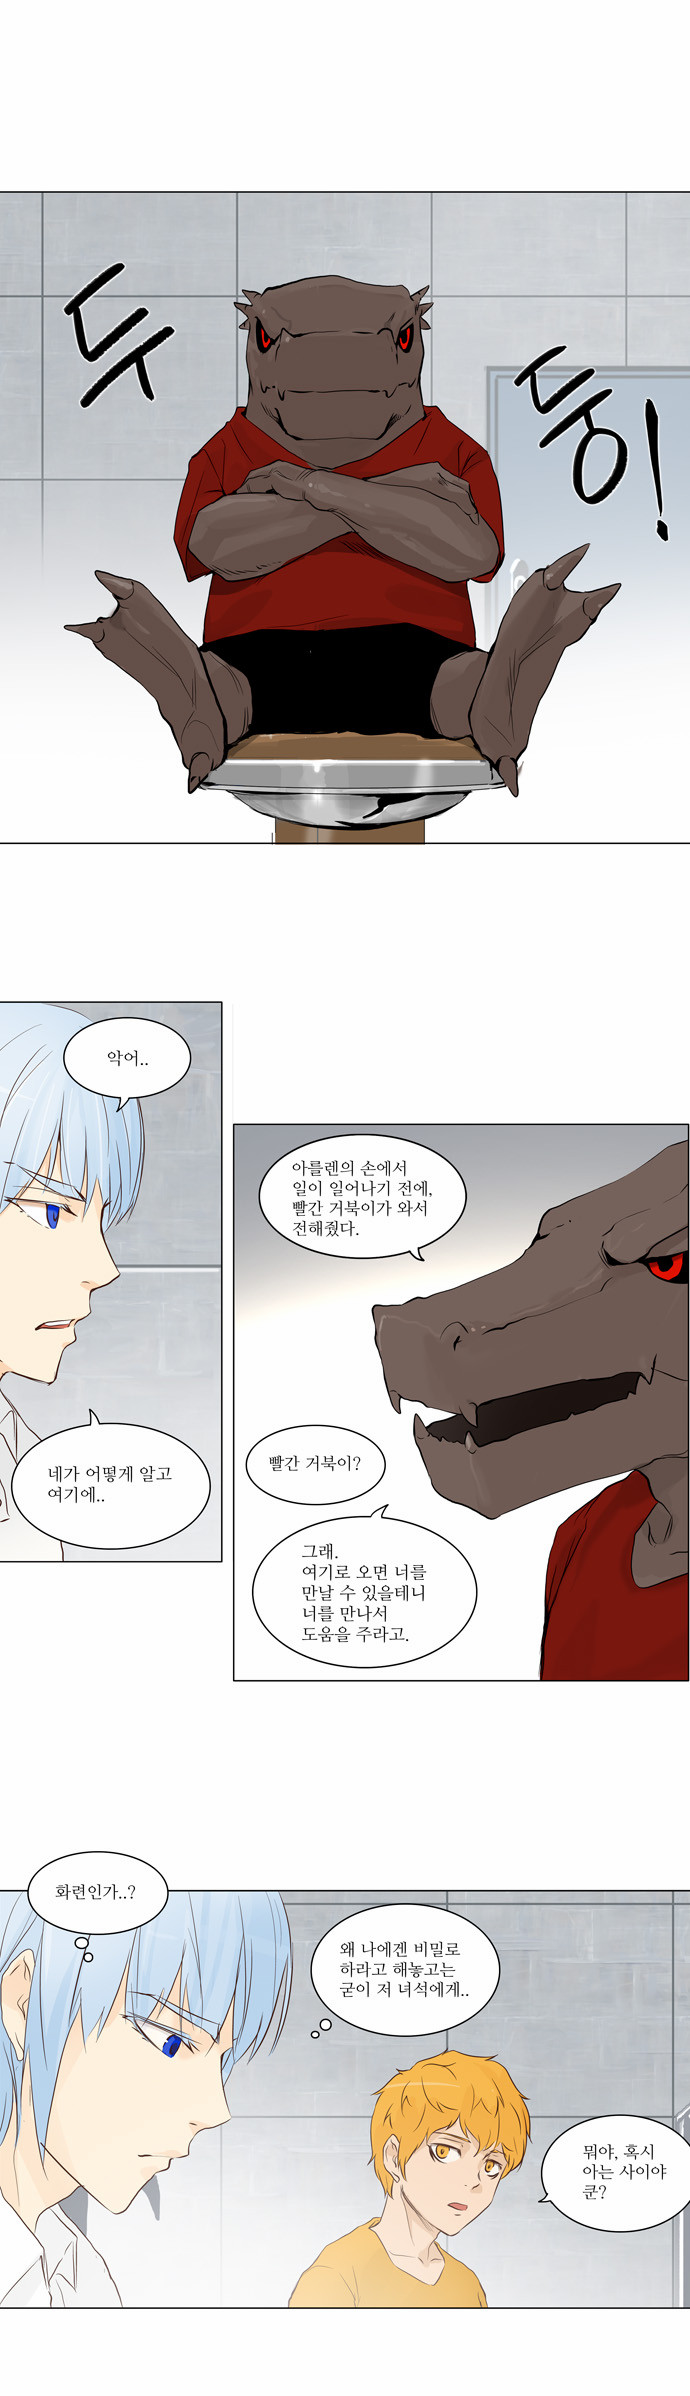 Tower of God - Chapter 148 - Page 1